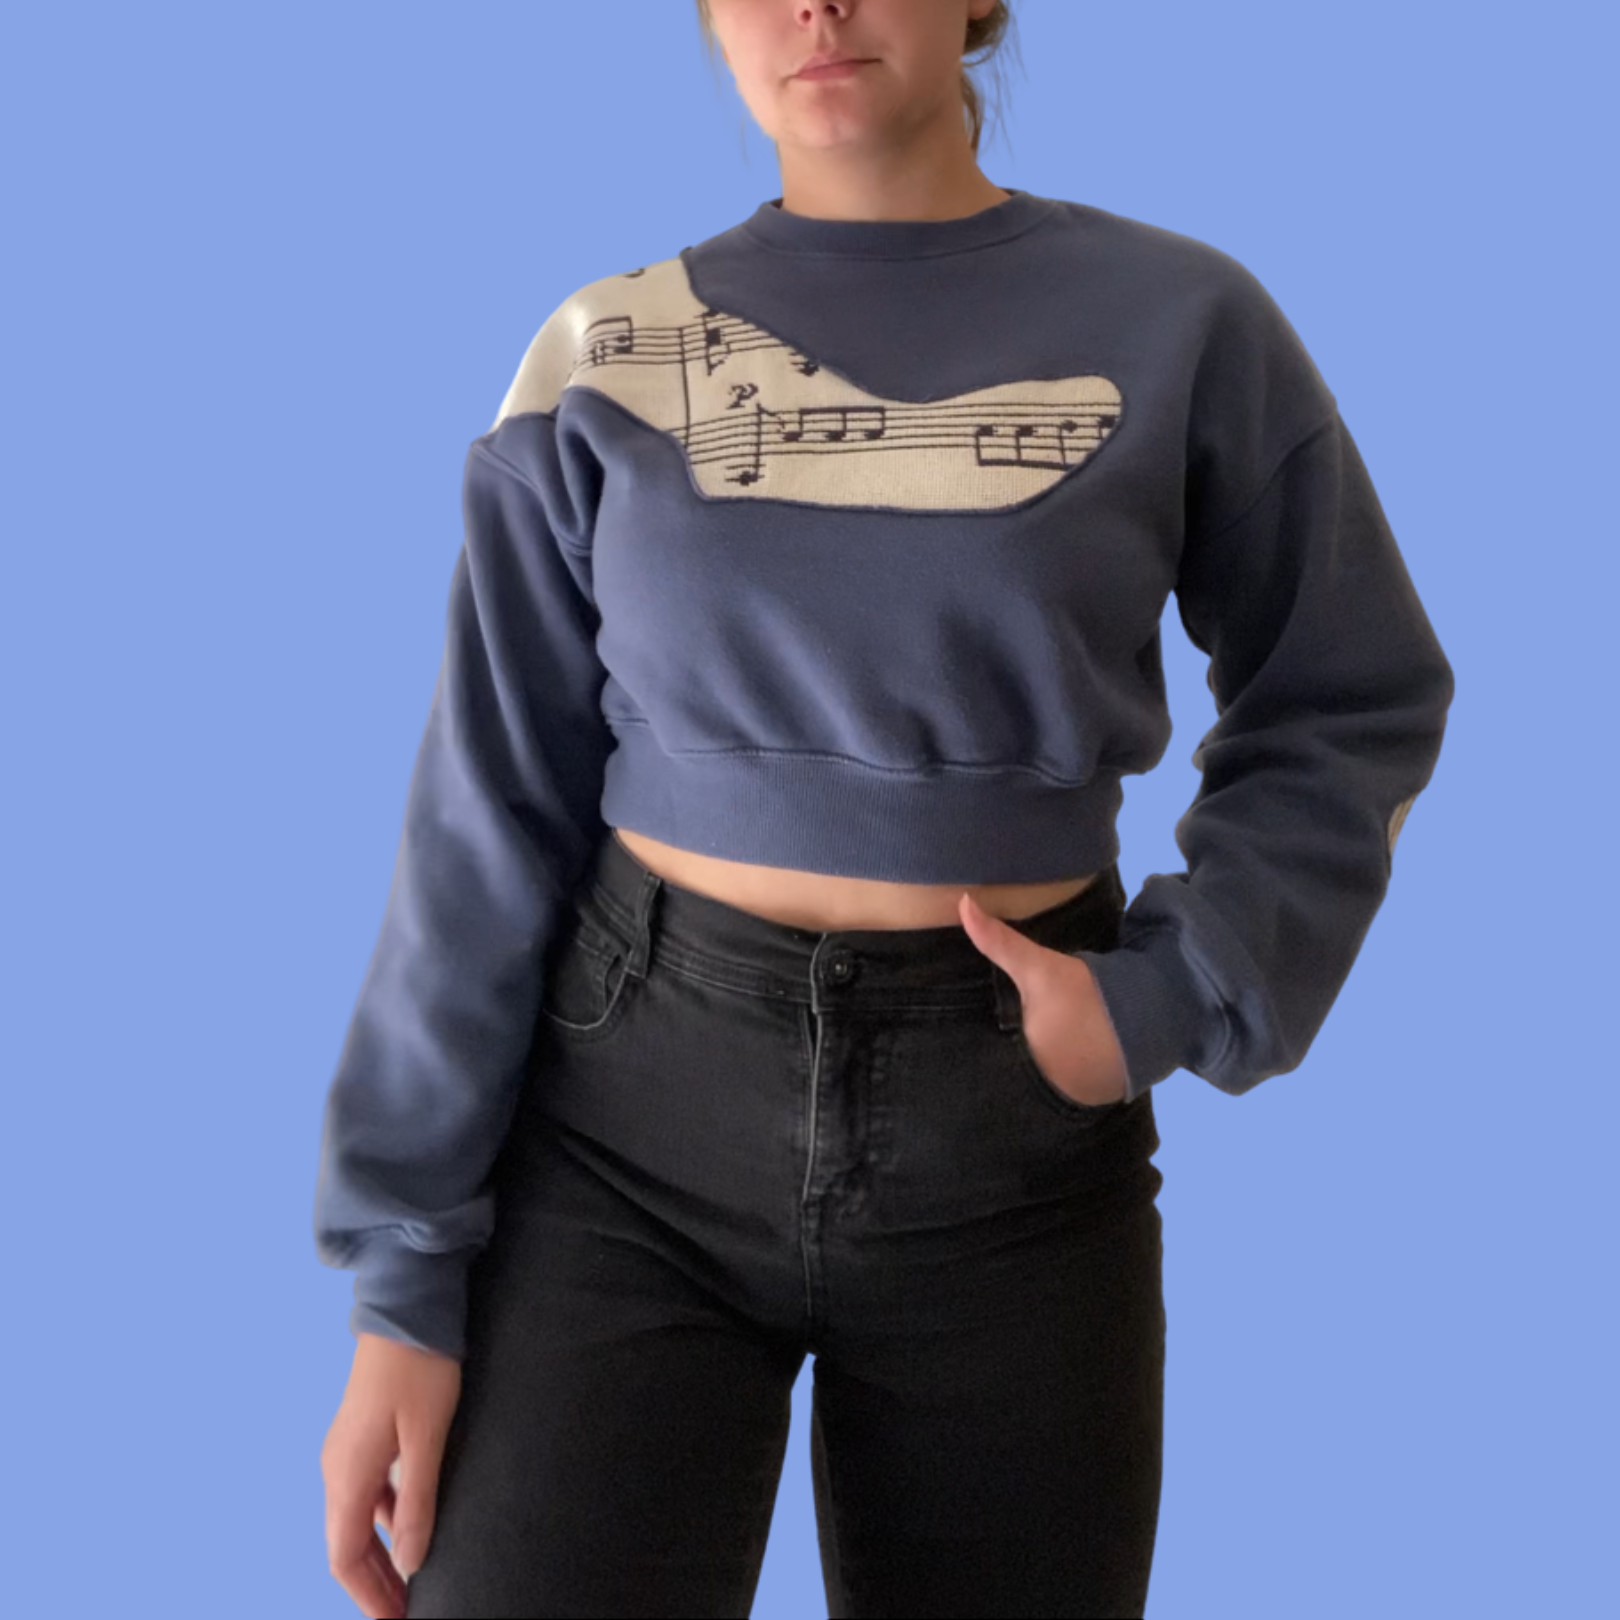 A woman wearing a blue sweatshirt with music notes on it.